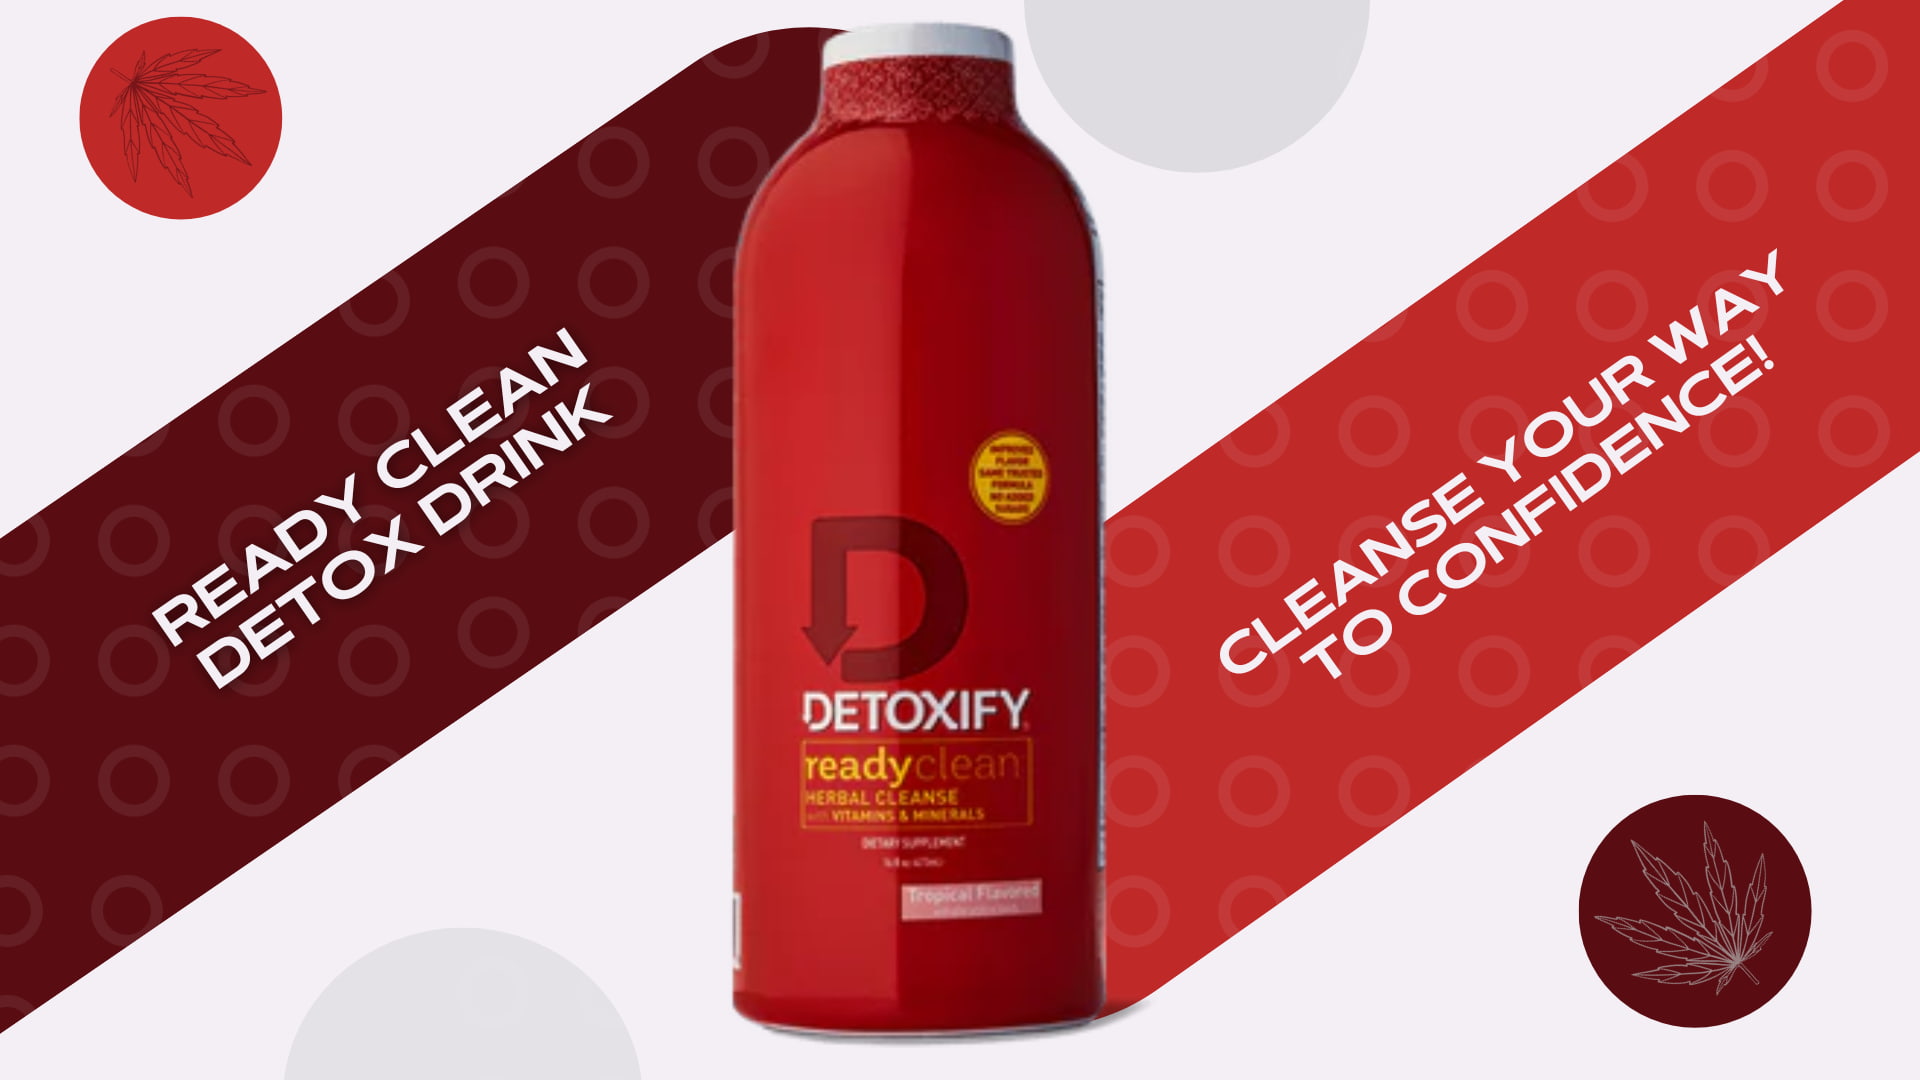 Ready Clean Detox Drink: Does It Really Work? - code3forchange